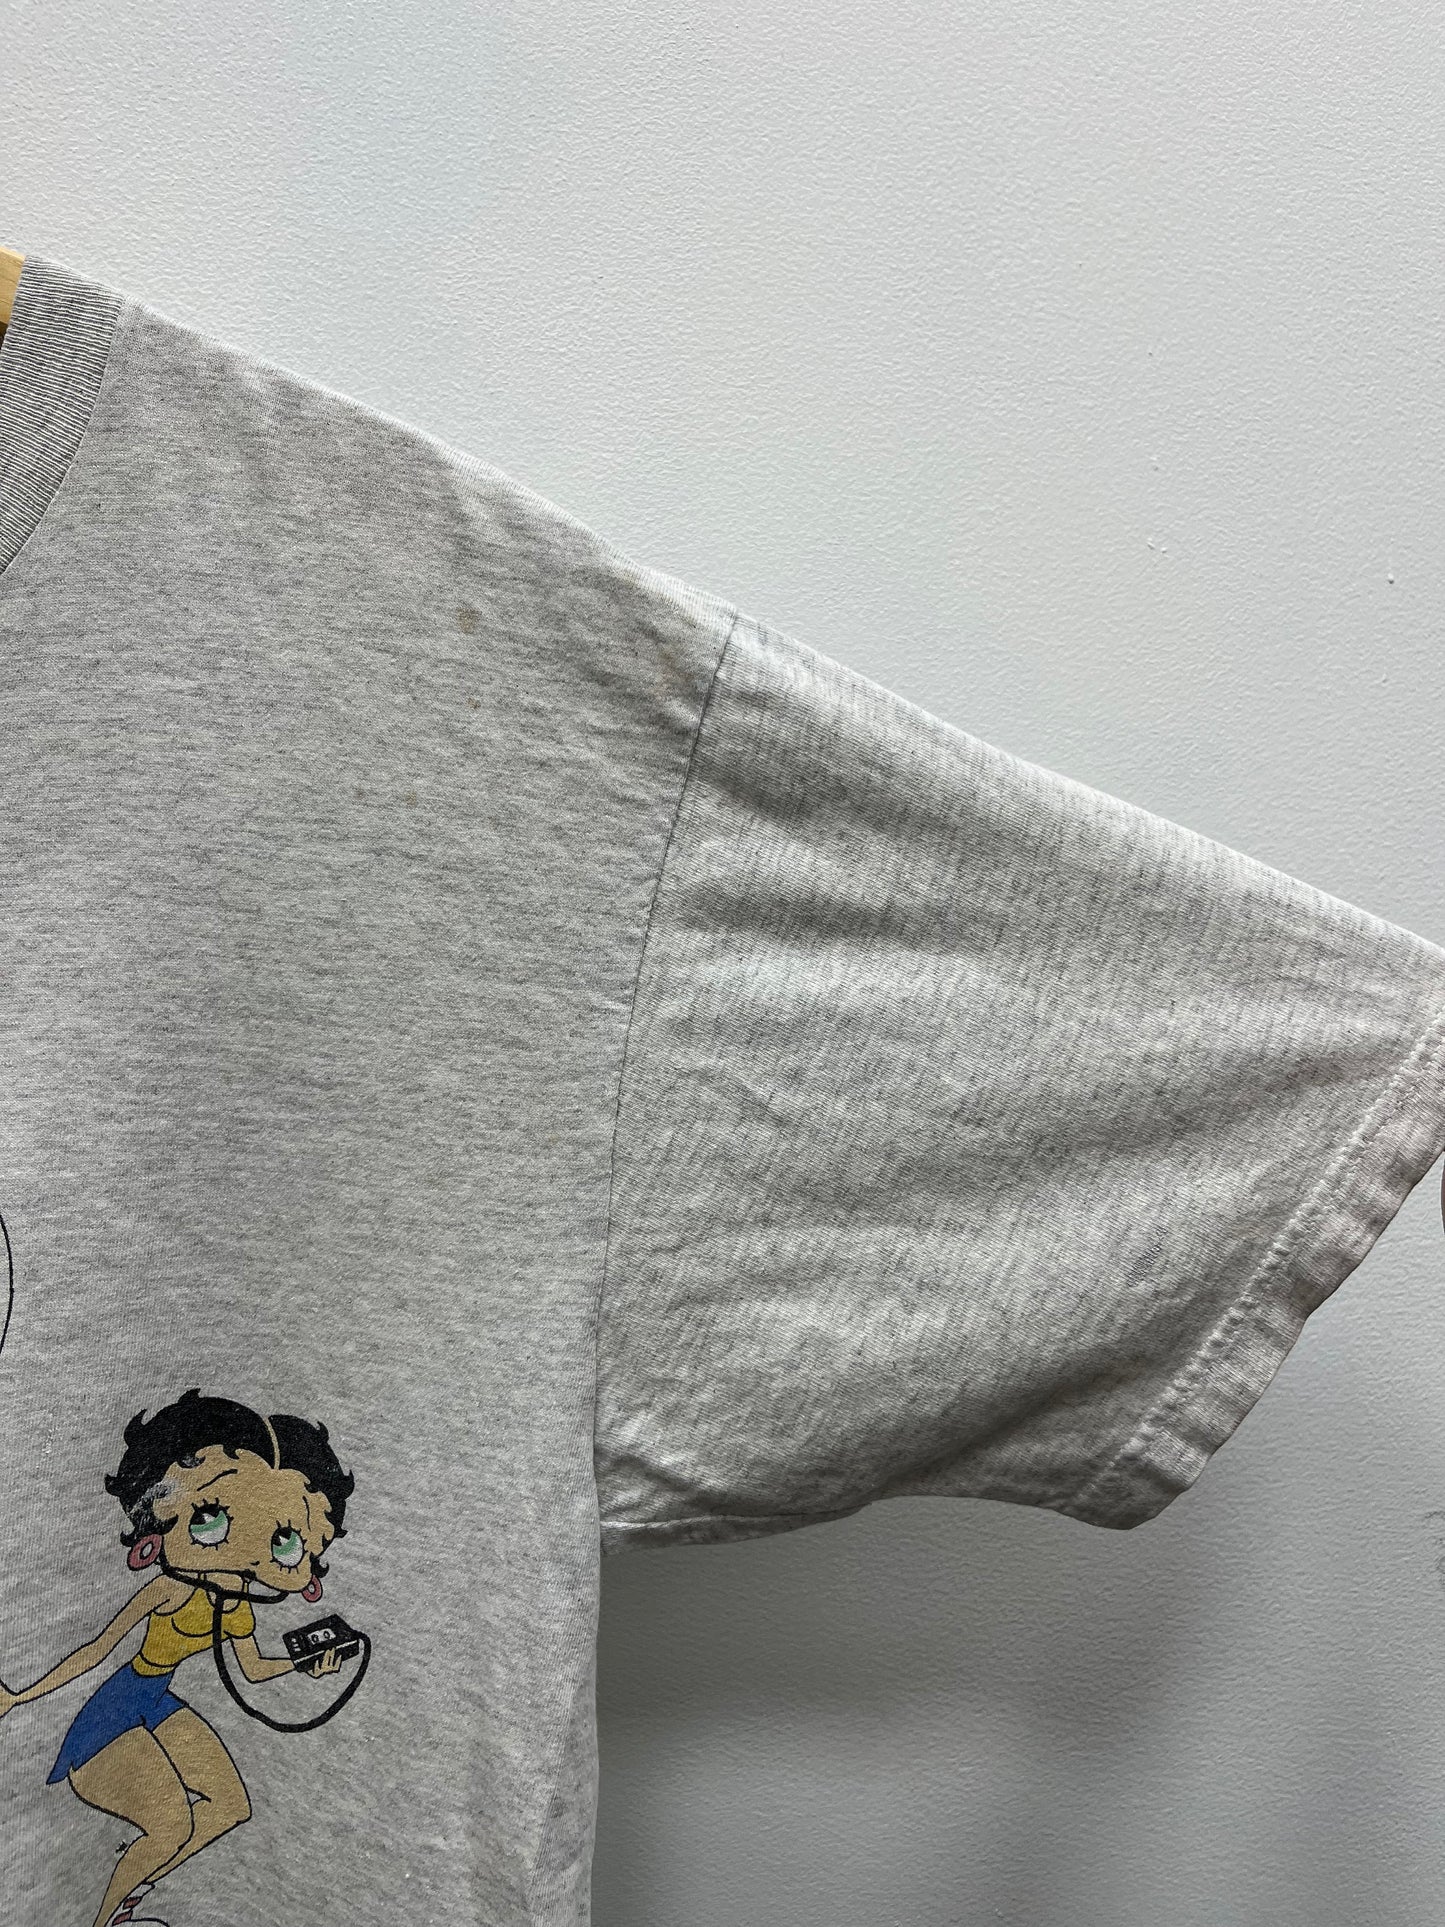 Vintage 1990’s Betty Boop Betty’s Workout Tee